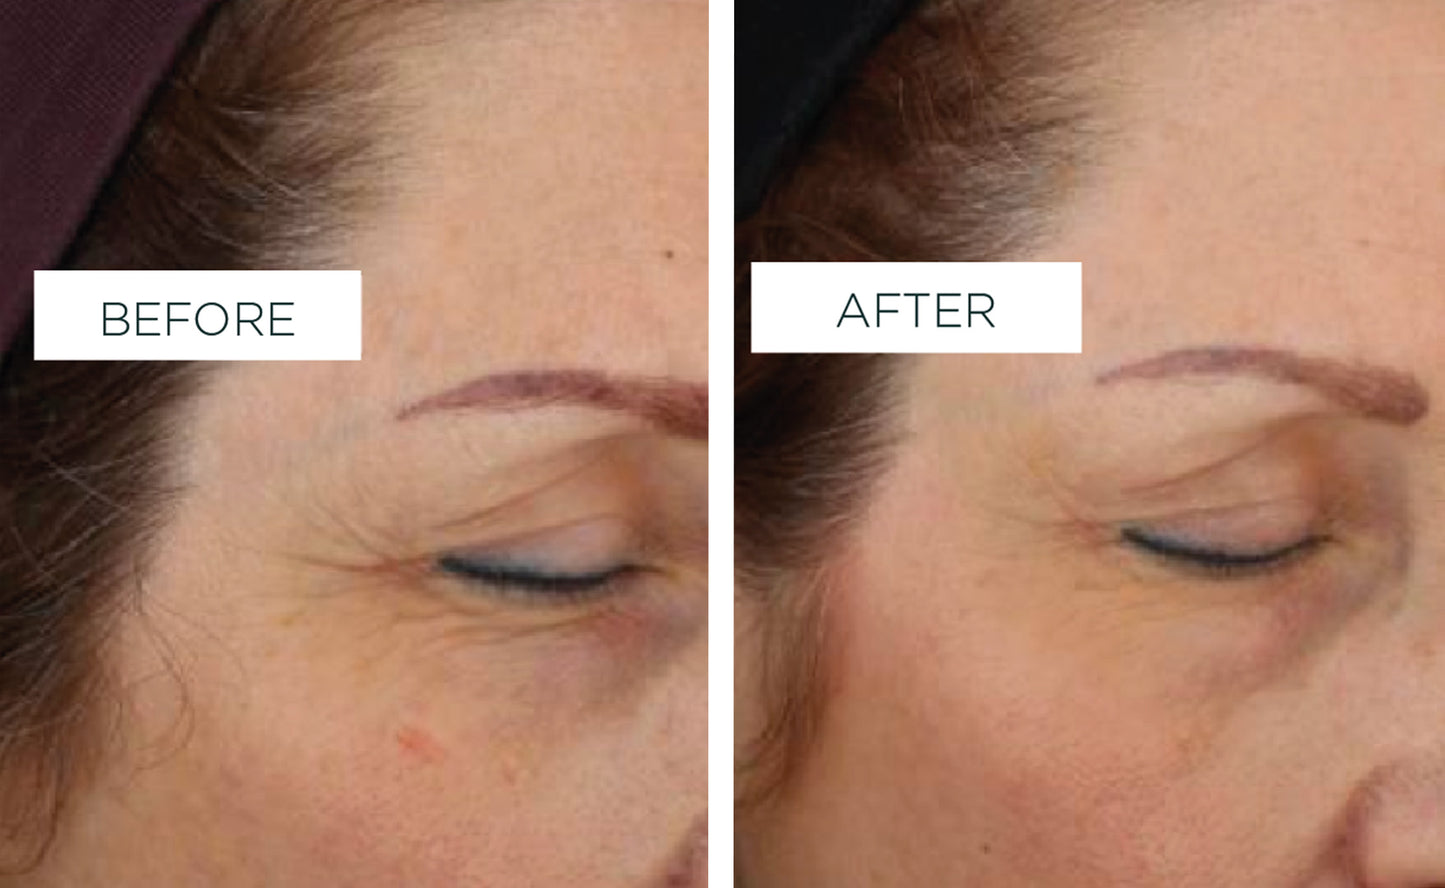 Veriphy'd by science | Clinical results | Before & After image